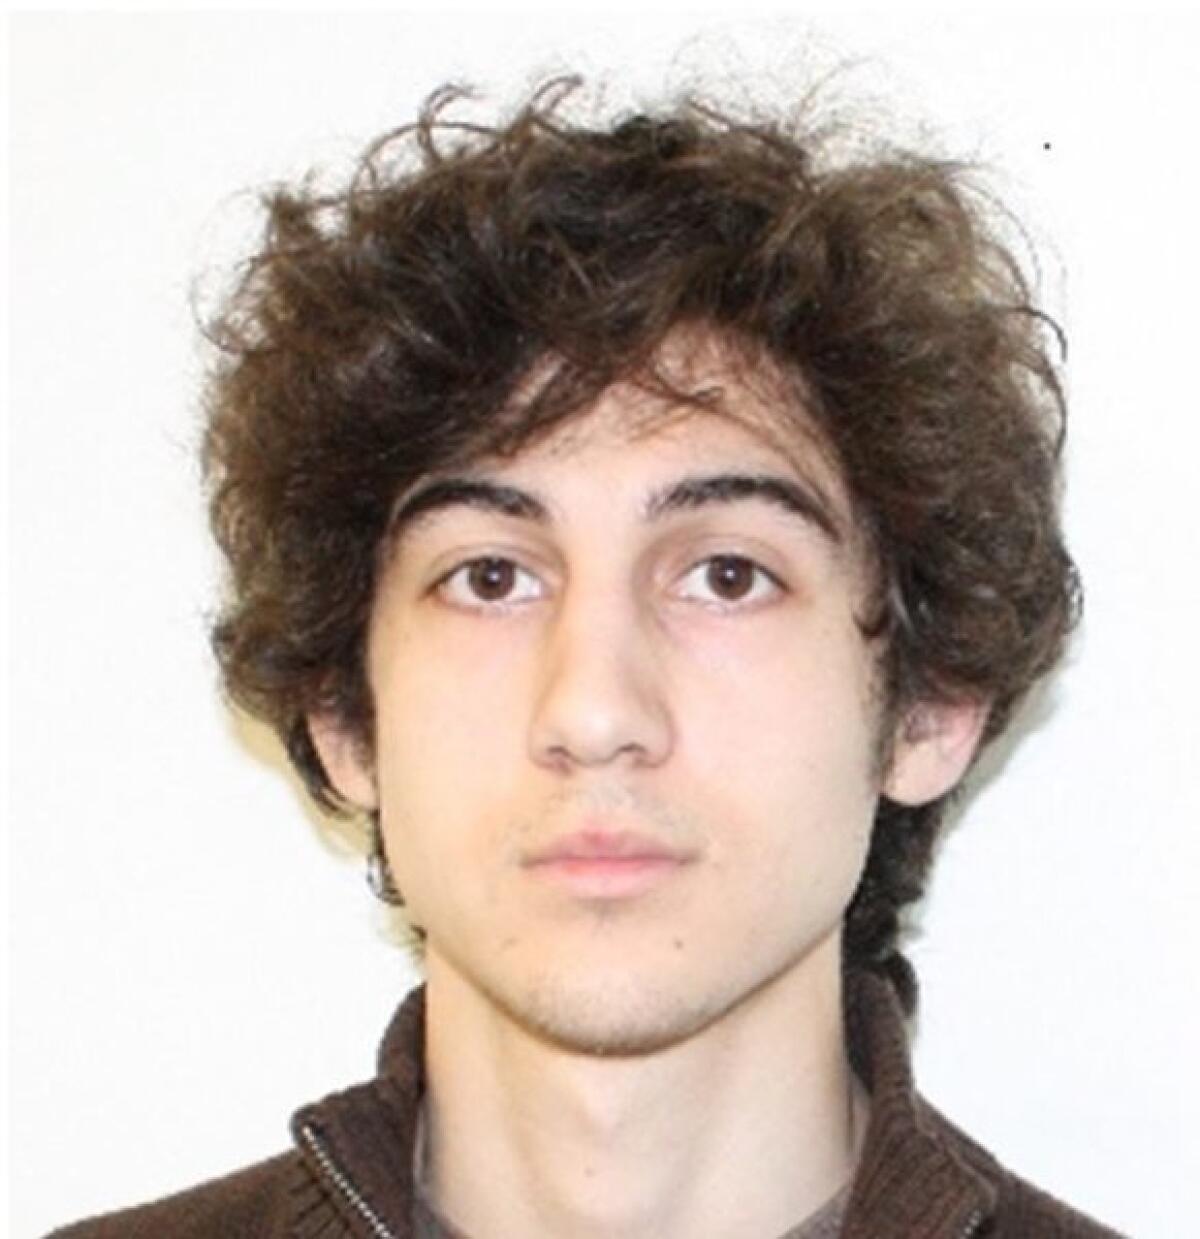 Dzhokhar Tsarnaev: Fangirls feel sorry for "Jahar," the nickname he used as a Twitter handle and that is now part of dozens of hashtags (#FreeJahar is a favorite), Facebook pages and Tumblr blogs.